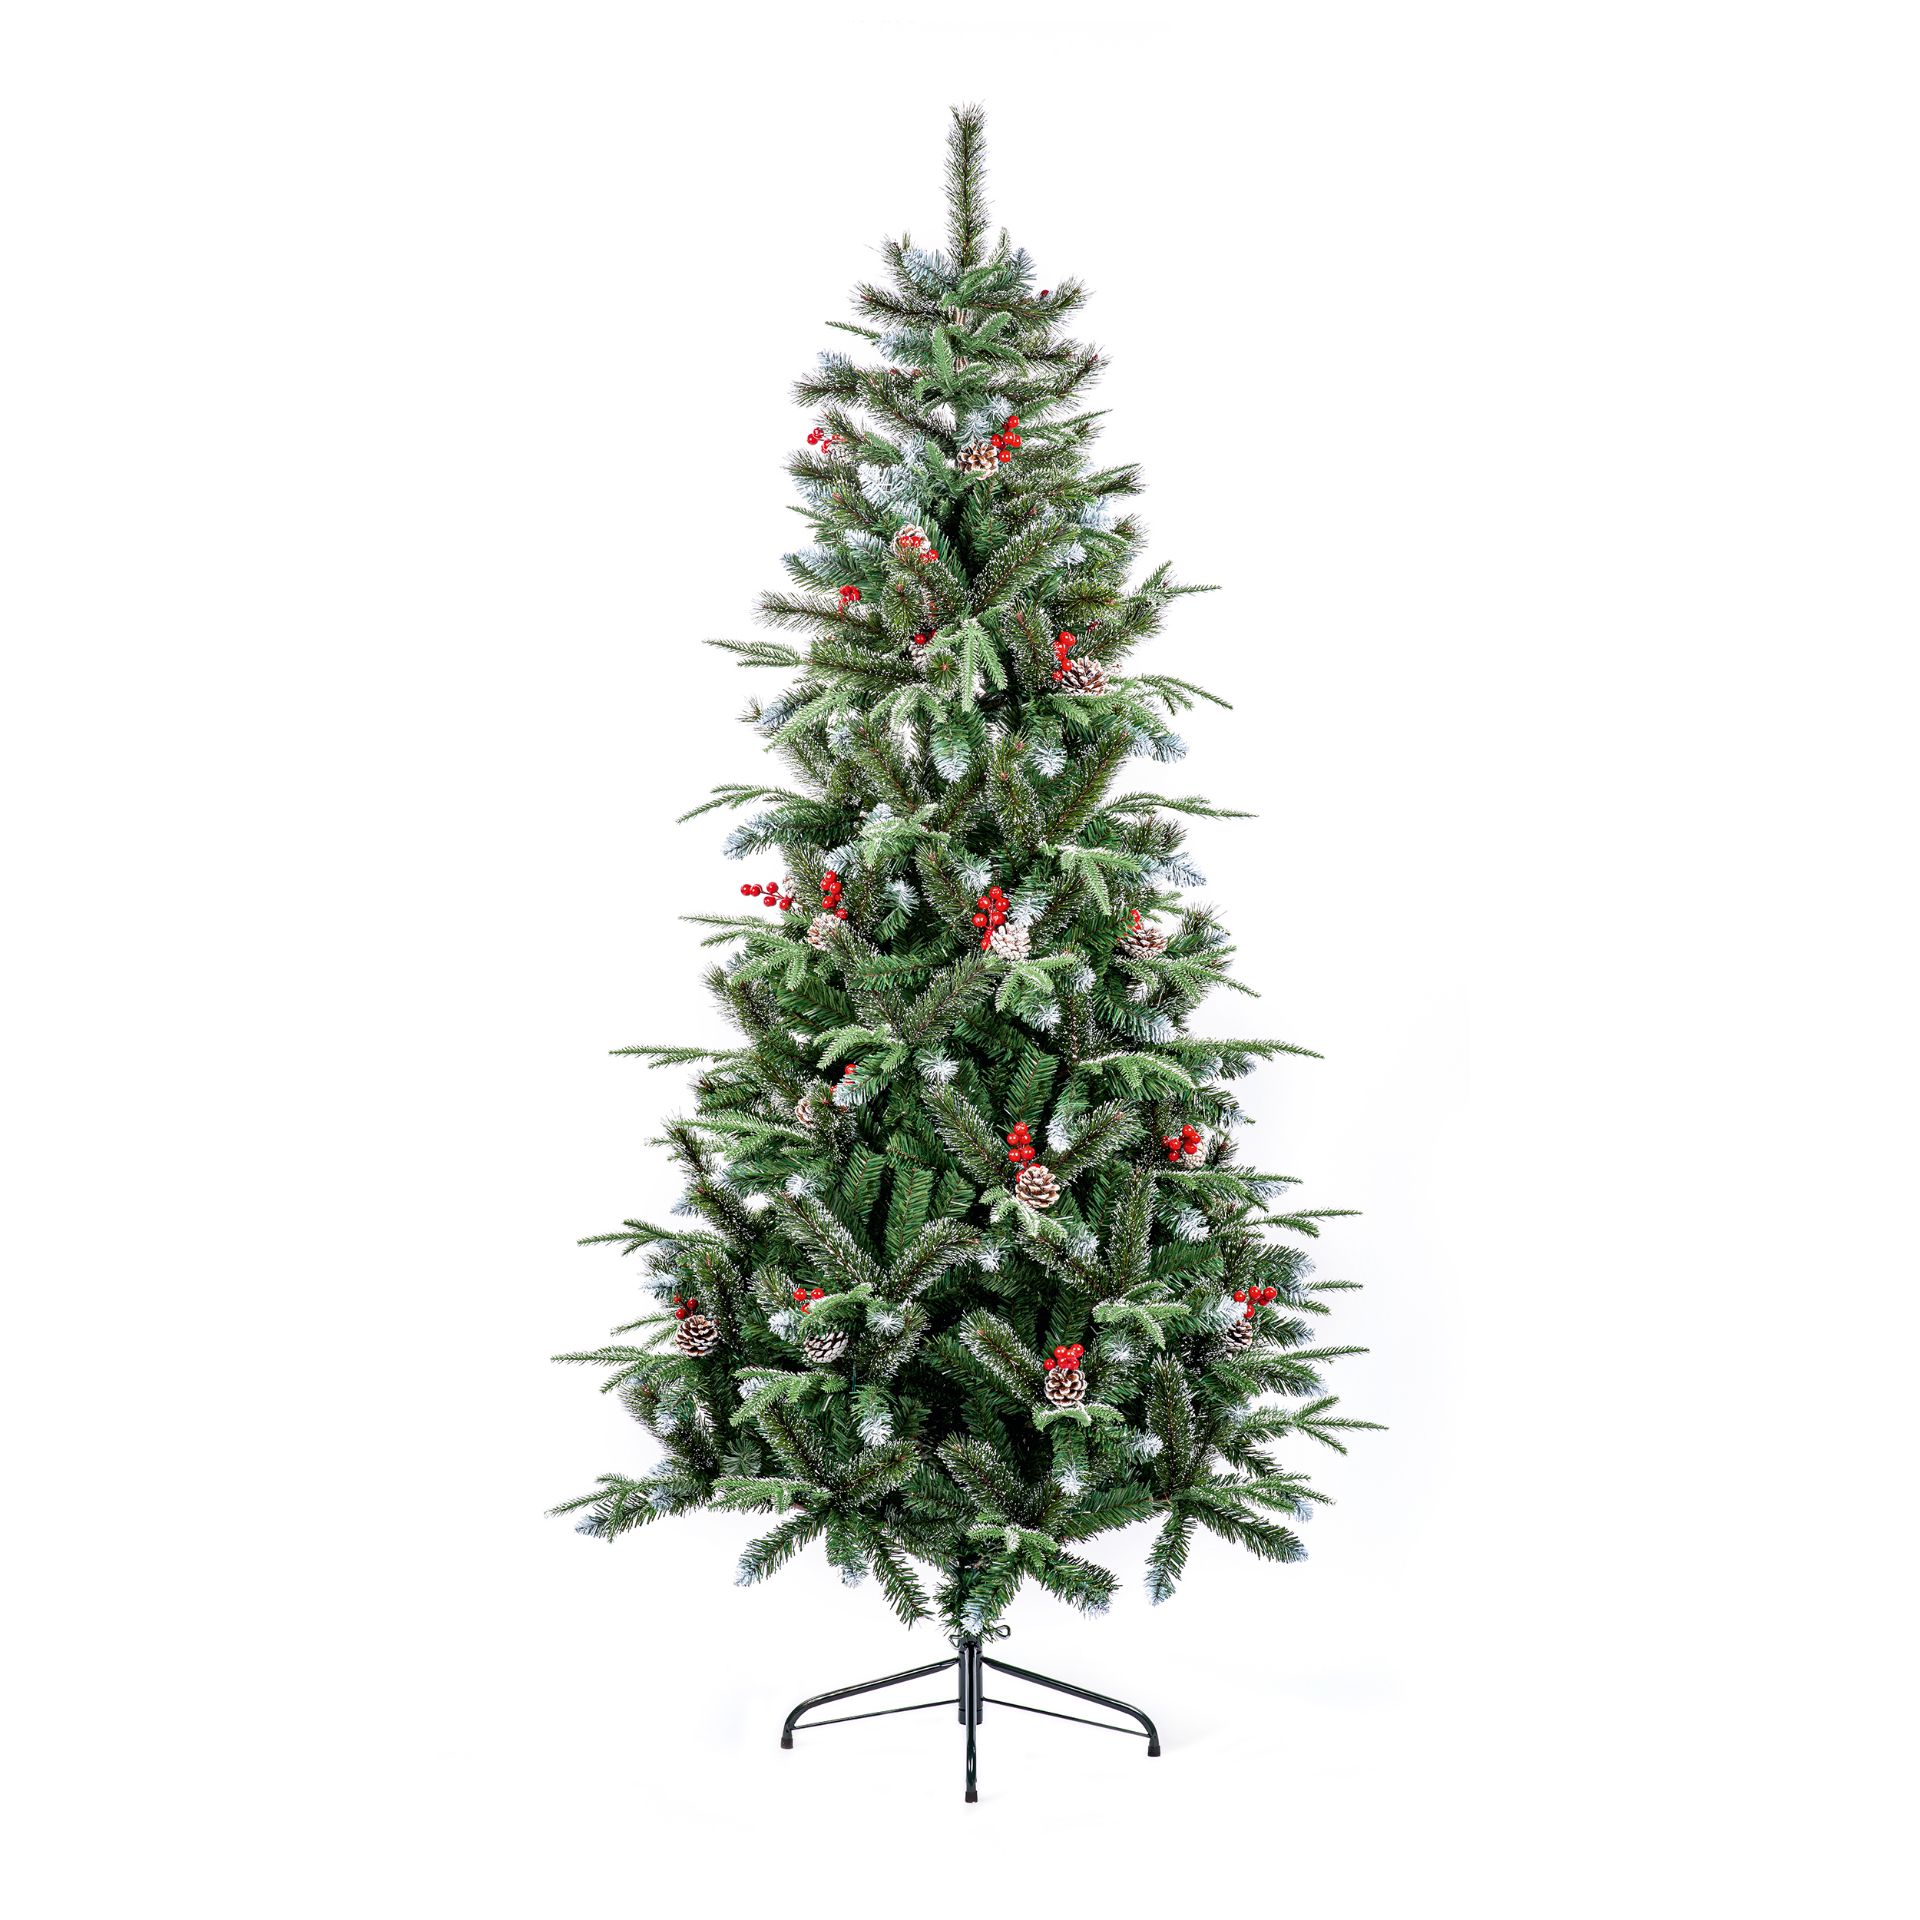 New Premier 1.8m Slim New Jersey Spruce Christmas Tree - PE/PVC w Cones and Berries - Image 2 of 6